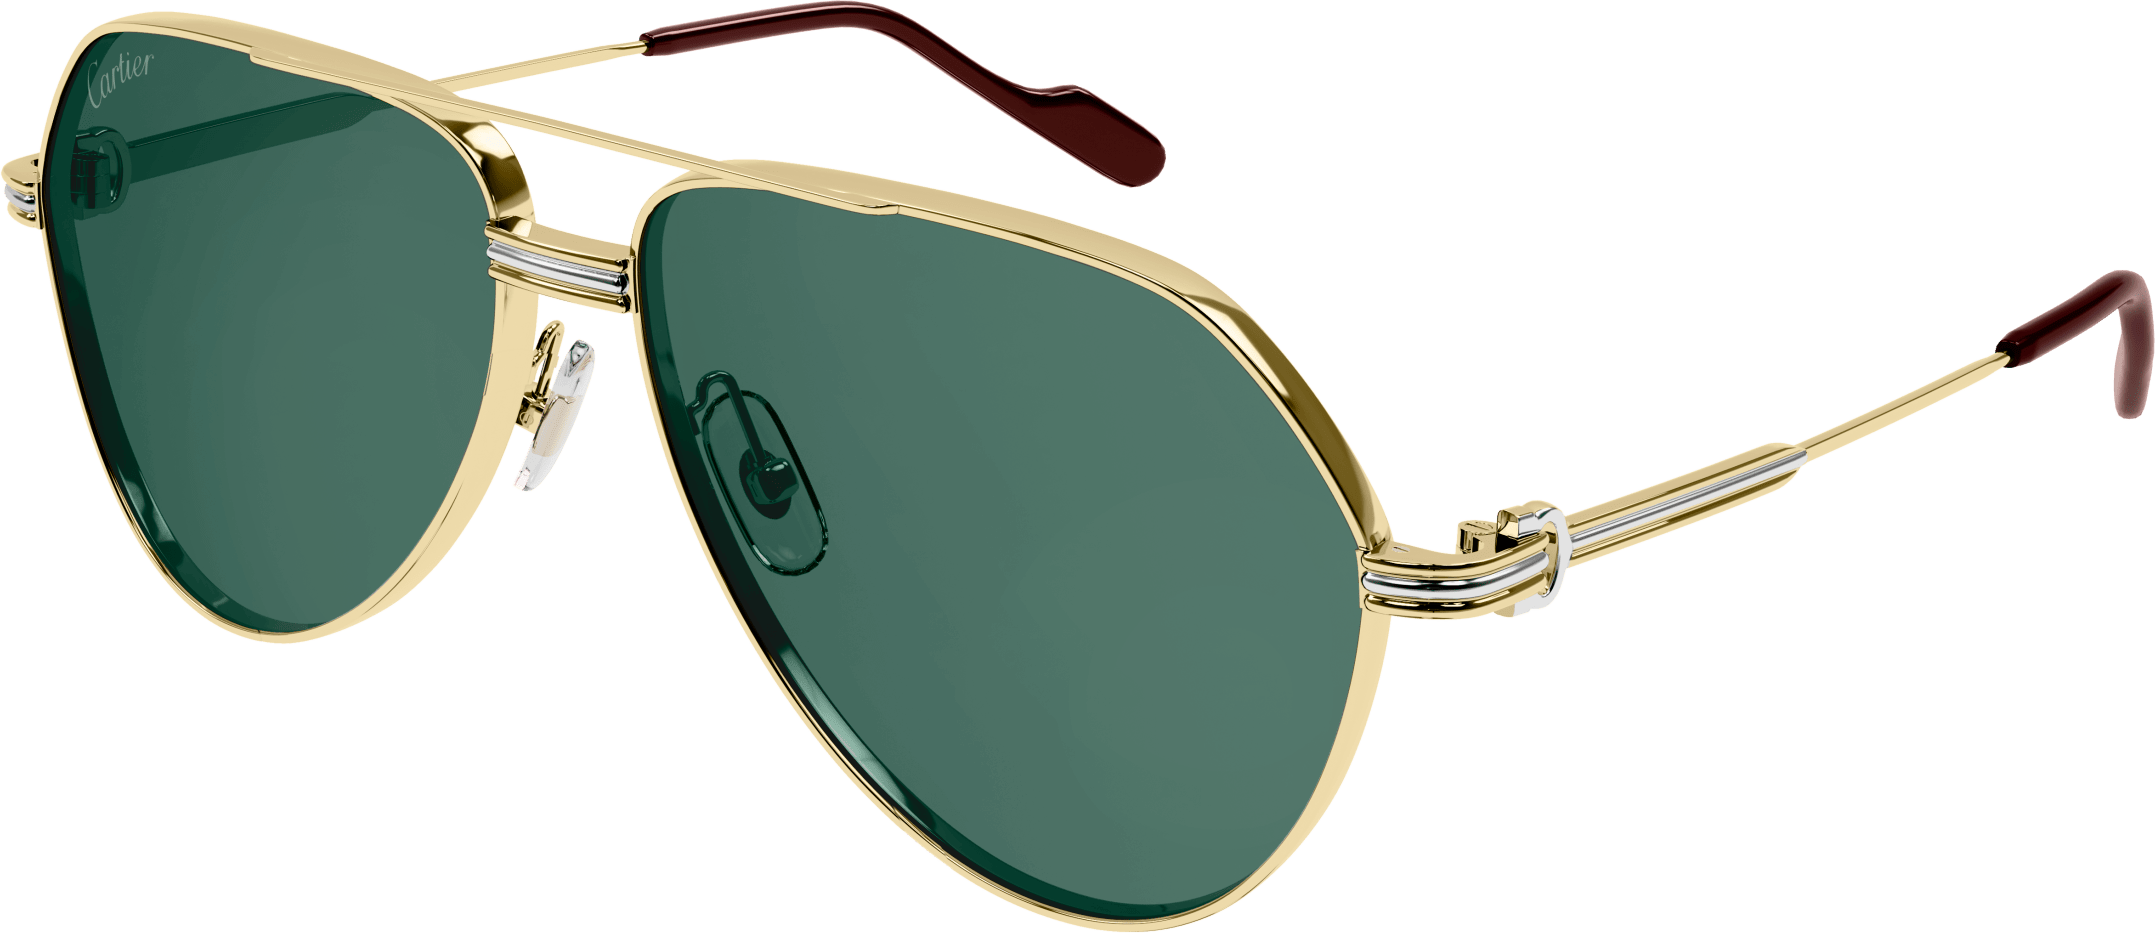 Color_CT0303S-004 - GOLD - GREEN - AR (ANTI REFLECTIVE)